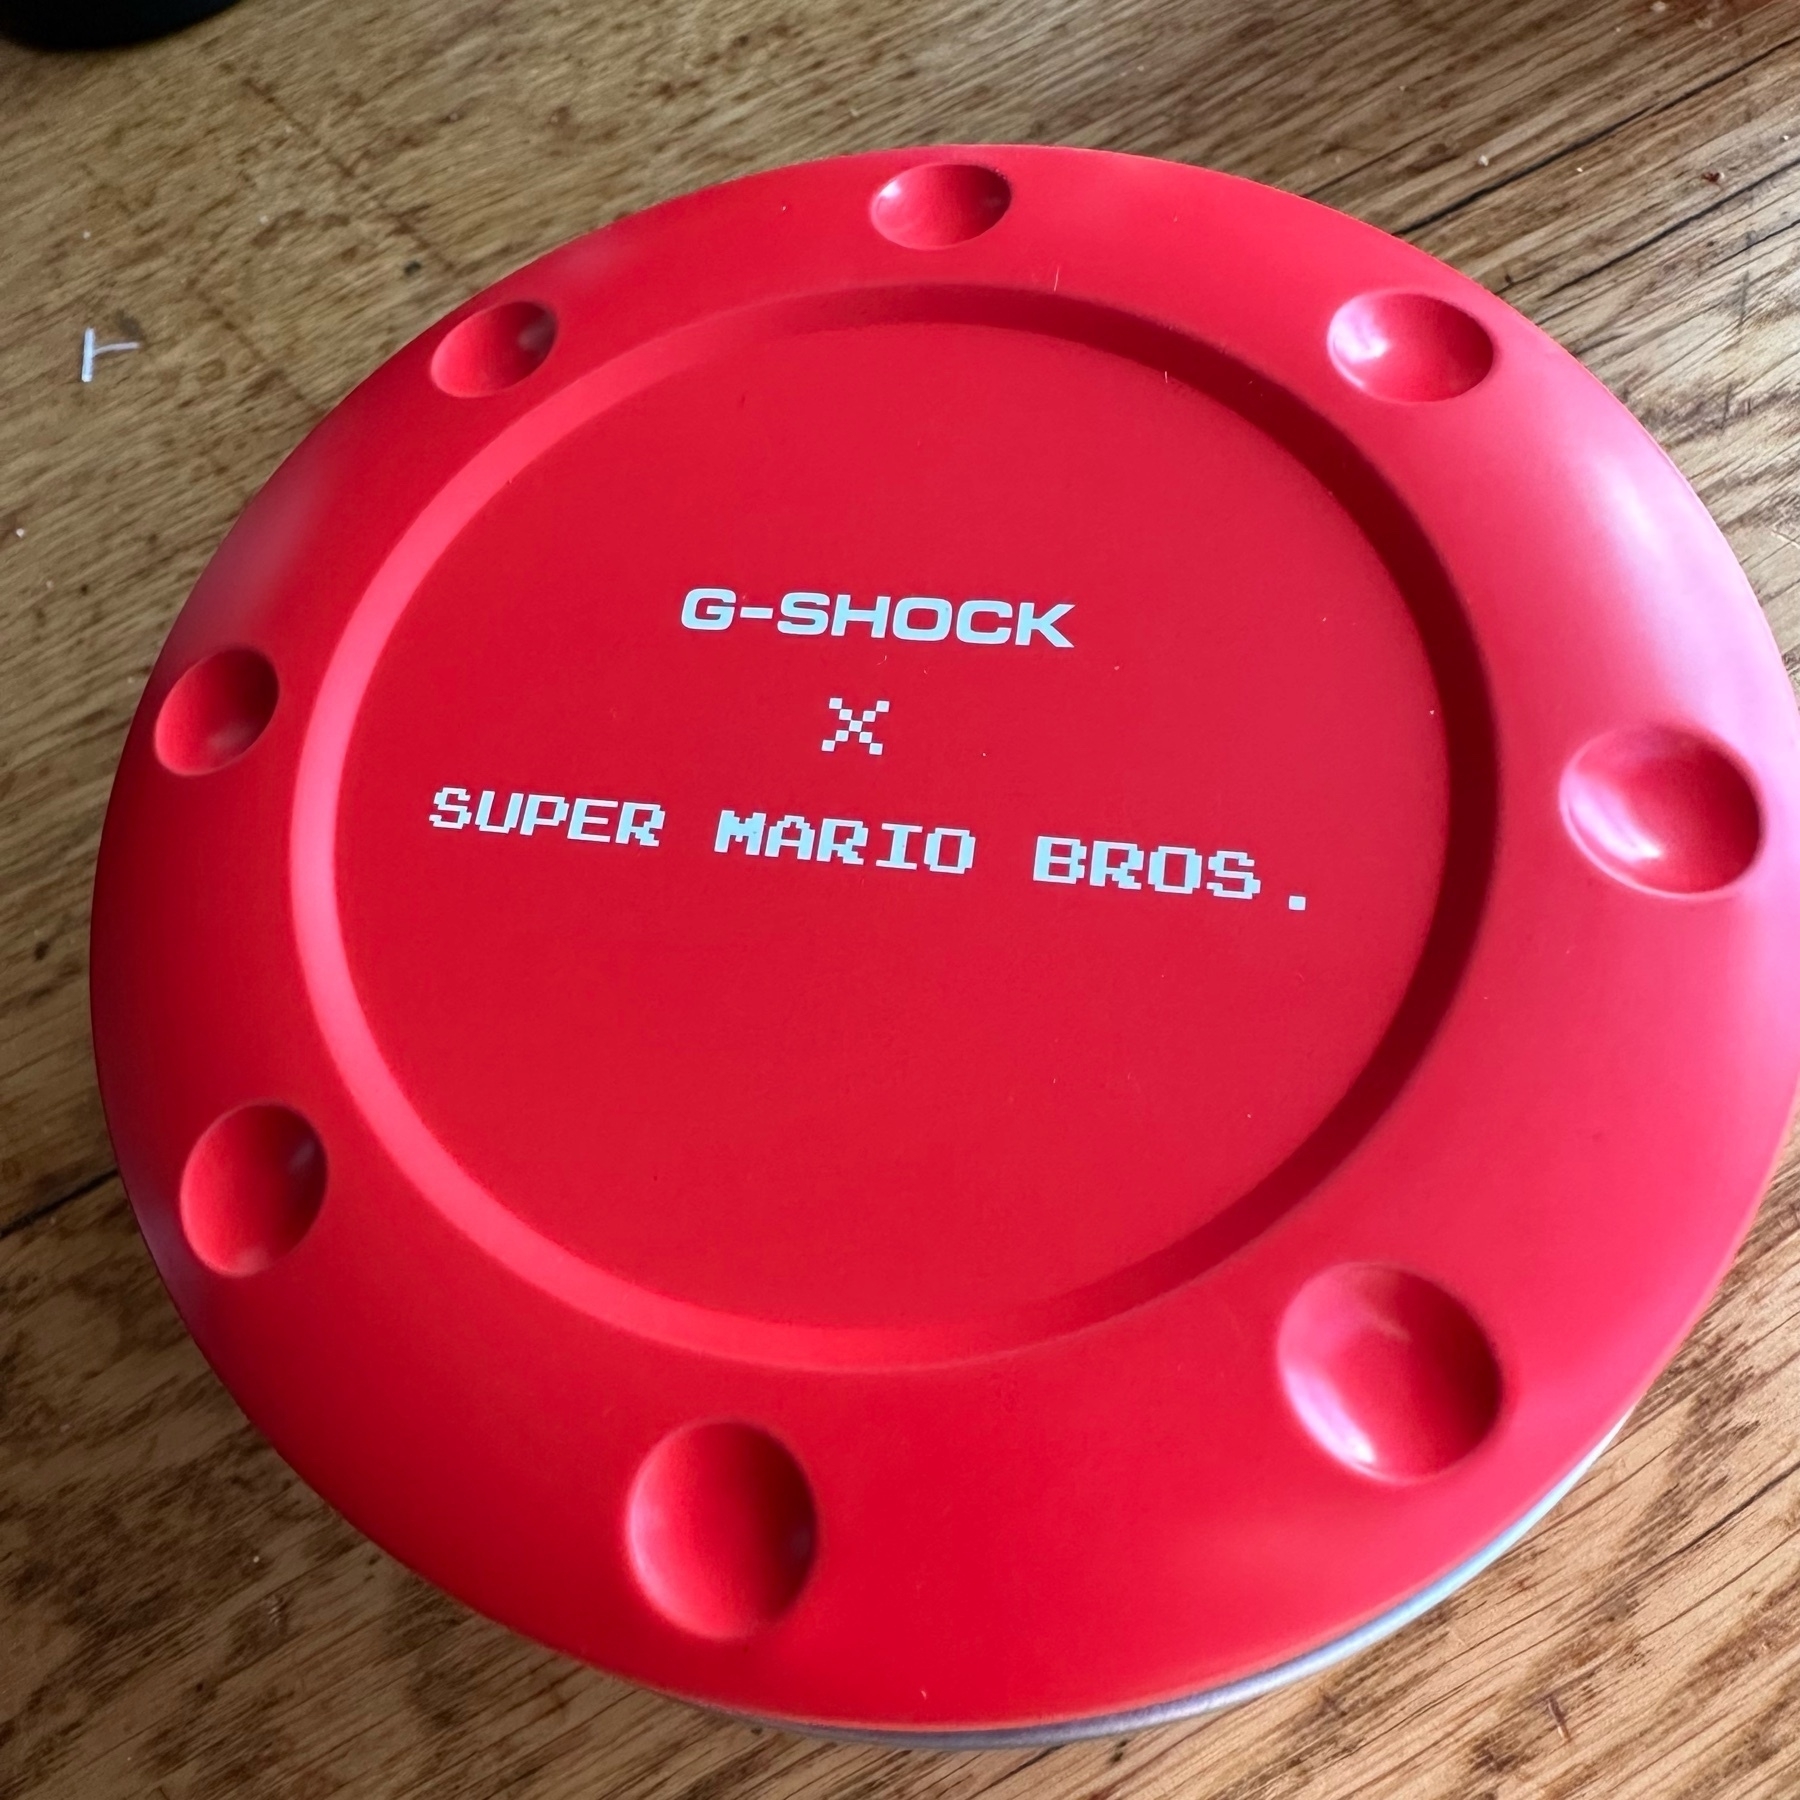 The very red top to the Casio G-Shock SUPER MARIO BROS watch tin